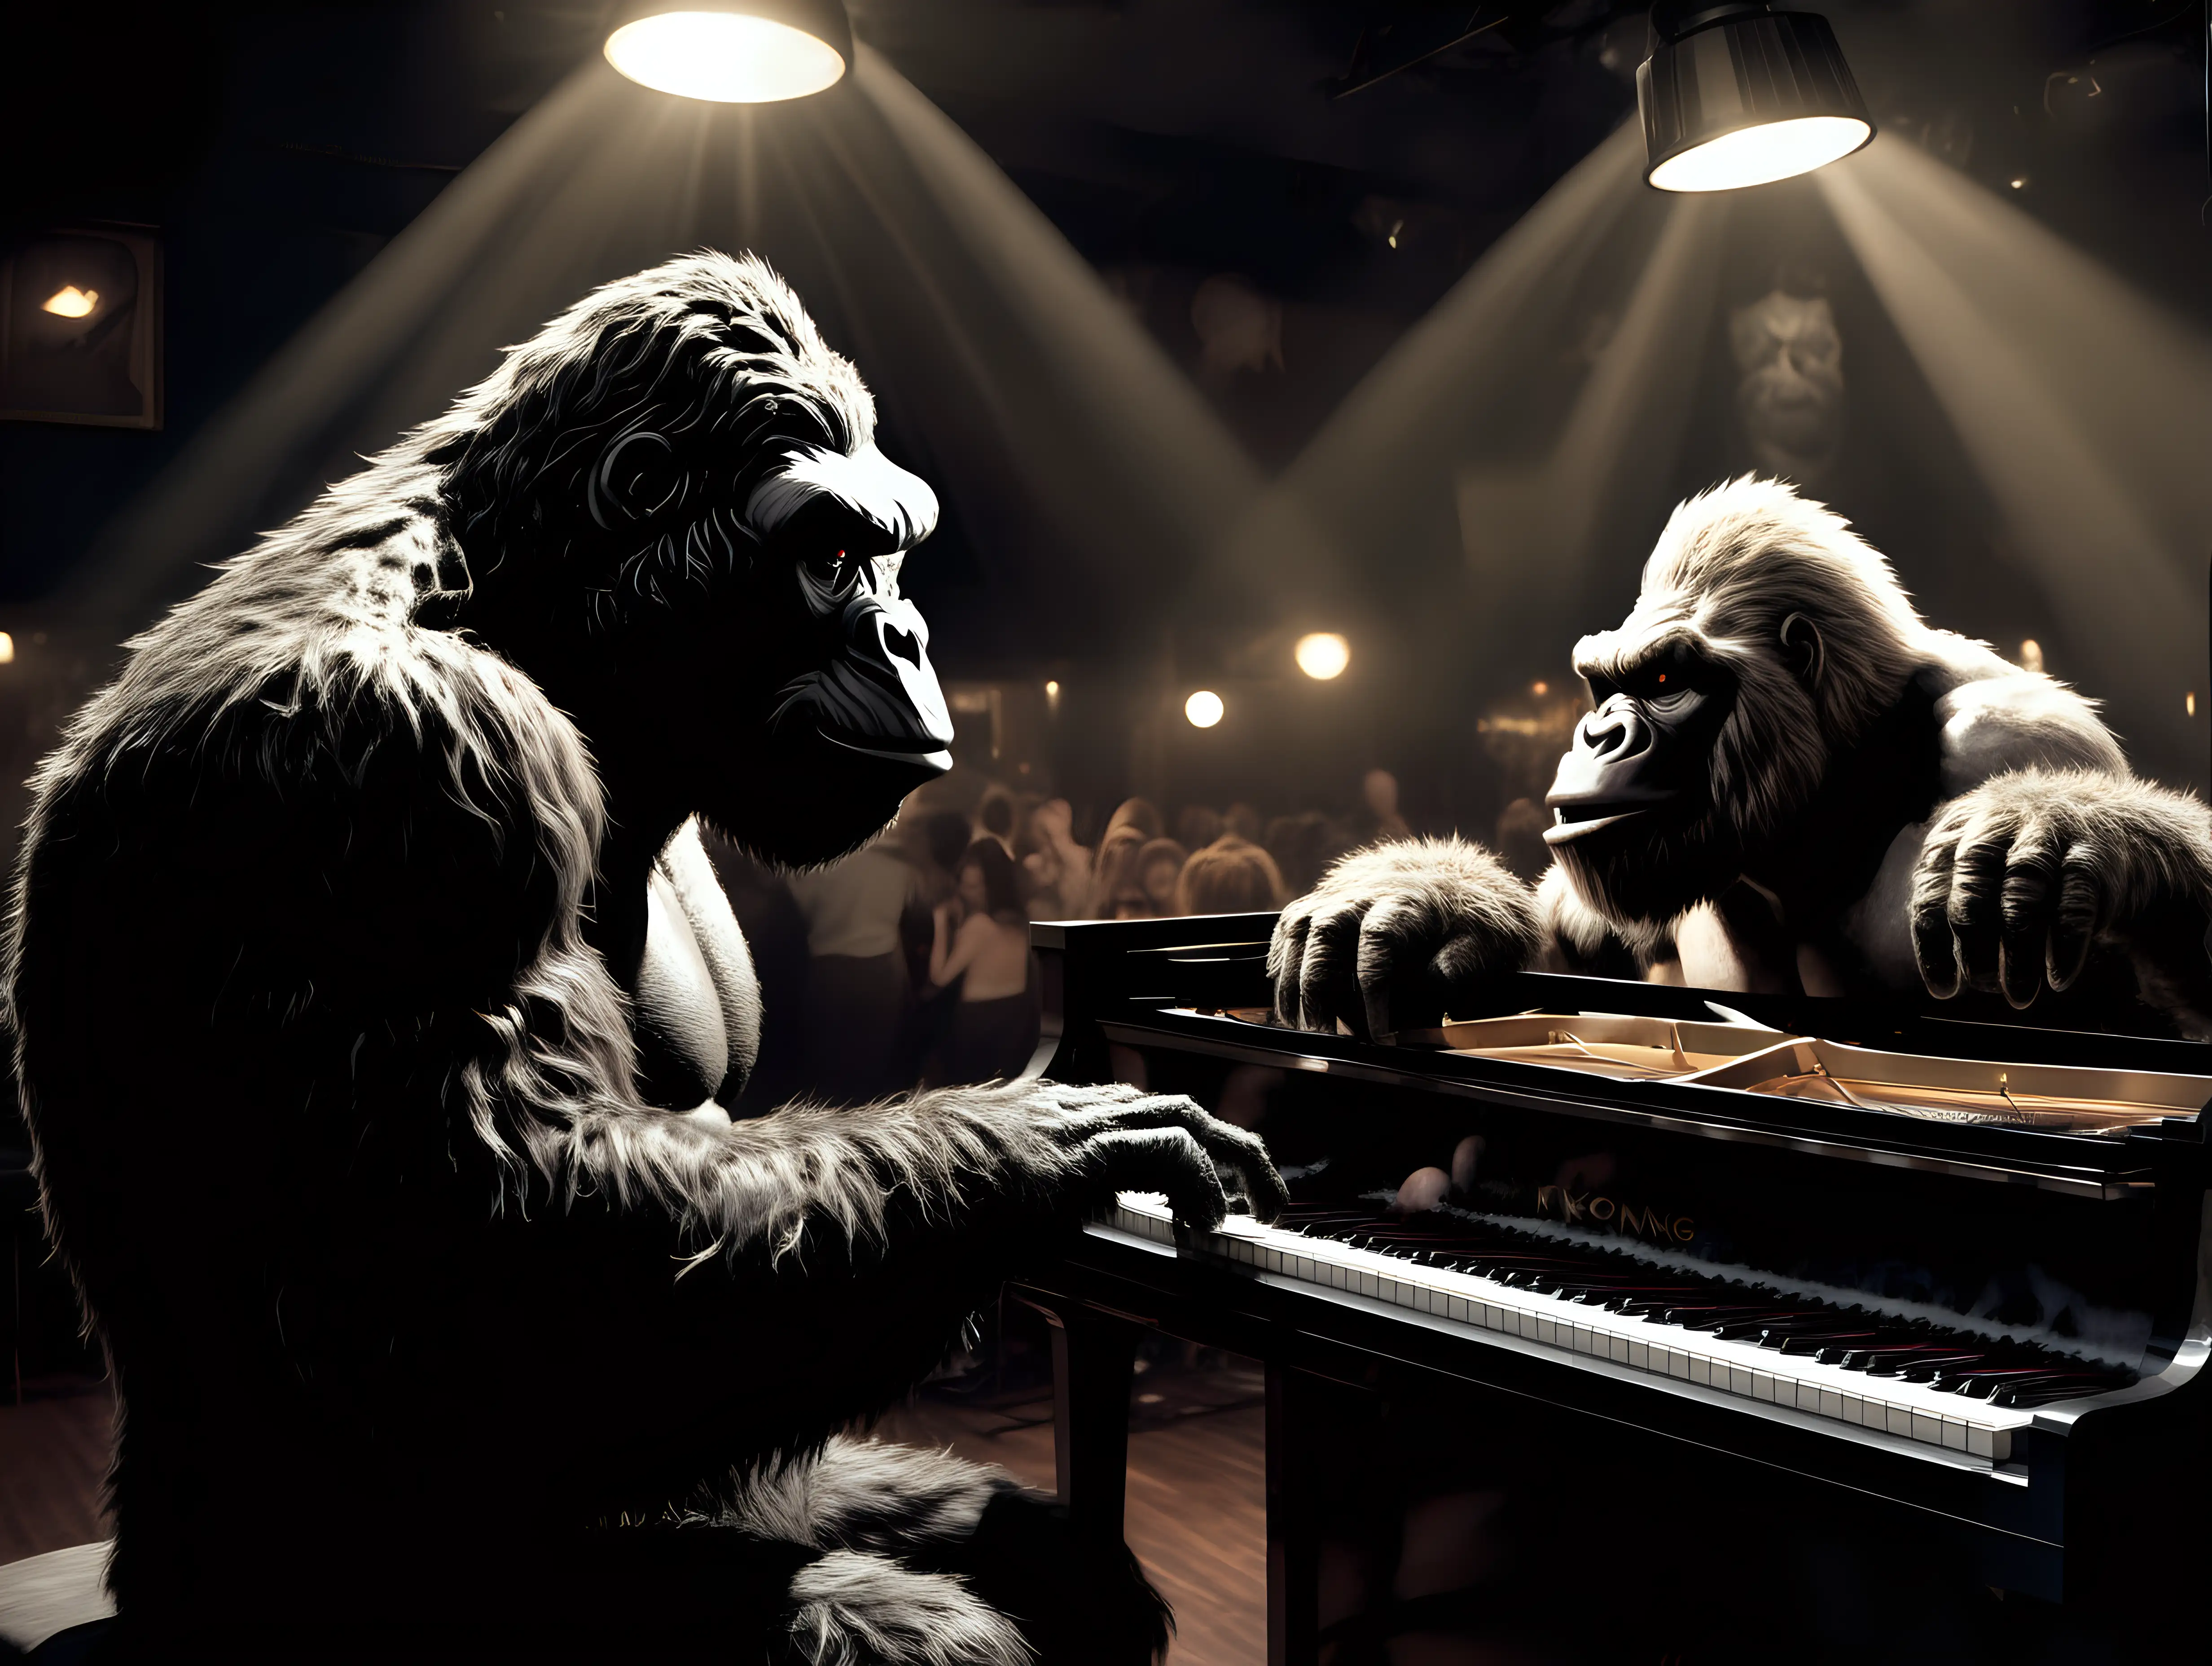 King Kong and the wolfman playing a piano duet
 in a night club with a spotlight